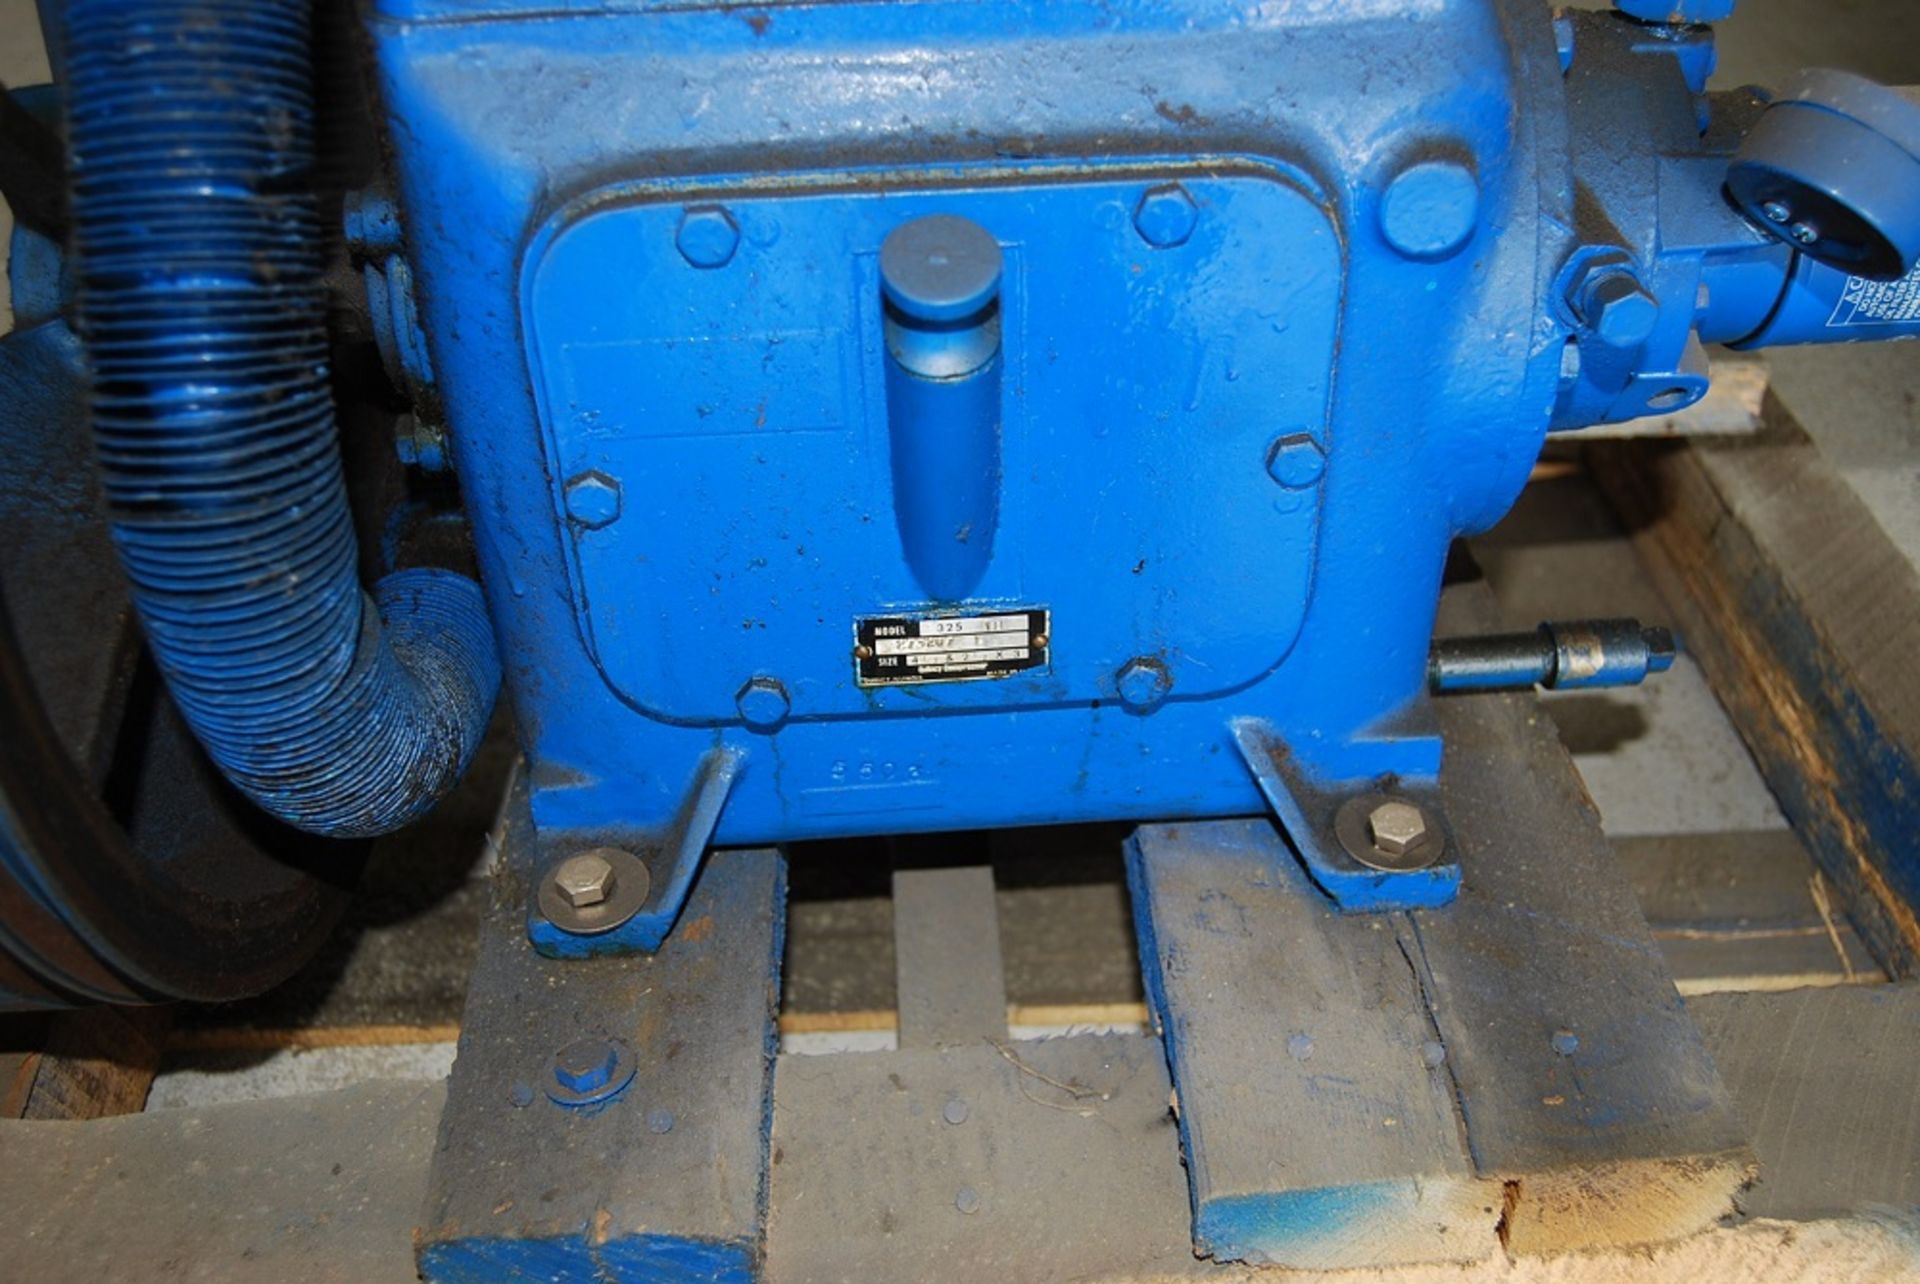 Spare 25 HP pump, Model: 325 18, SN: 273207 L, Pallet: 32" x 22" x 31" tall - Image 2 of 2